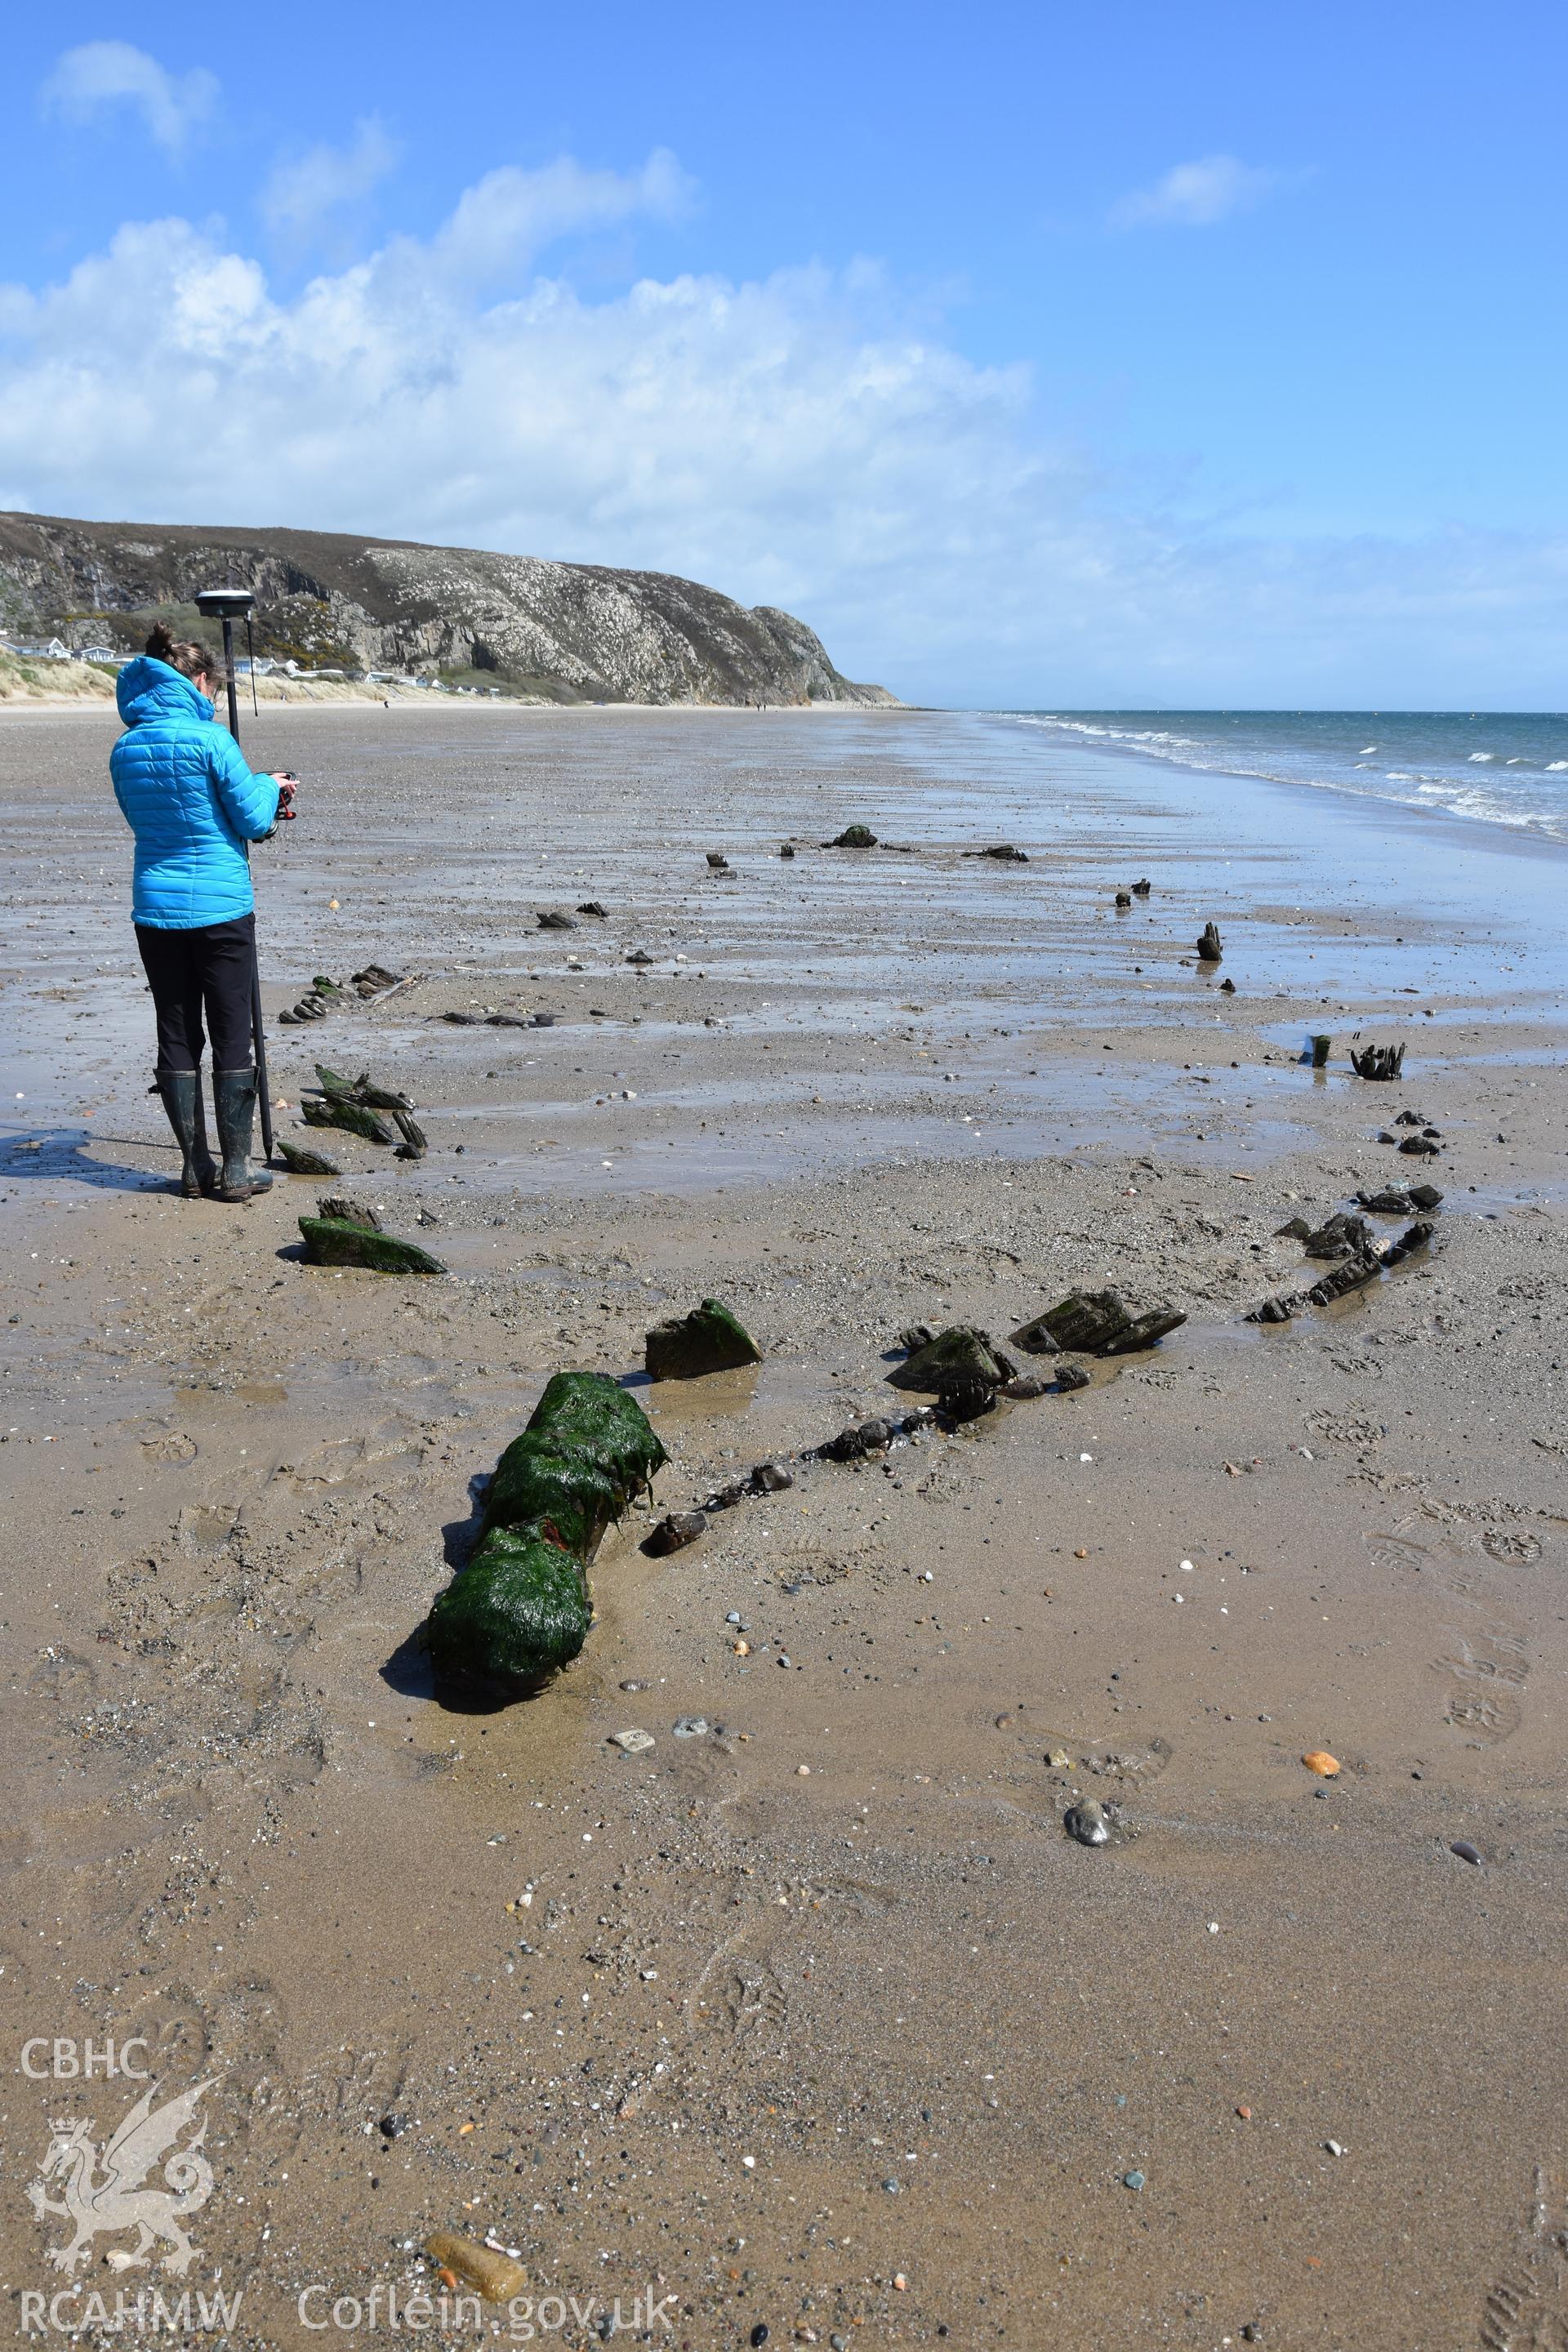 Baseline photo survey of unnamed wreck on The Warren sands, thought to be the FOSIL, taken at 0.9m low tide on 26th April 2018. ? Crown: CHERISH PROJECT 2017. Produced with EU funds through the Ireland Wales Co-operation Programme 2014-2020. All material made freely available through the Open Government Licence.